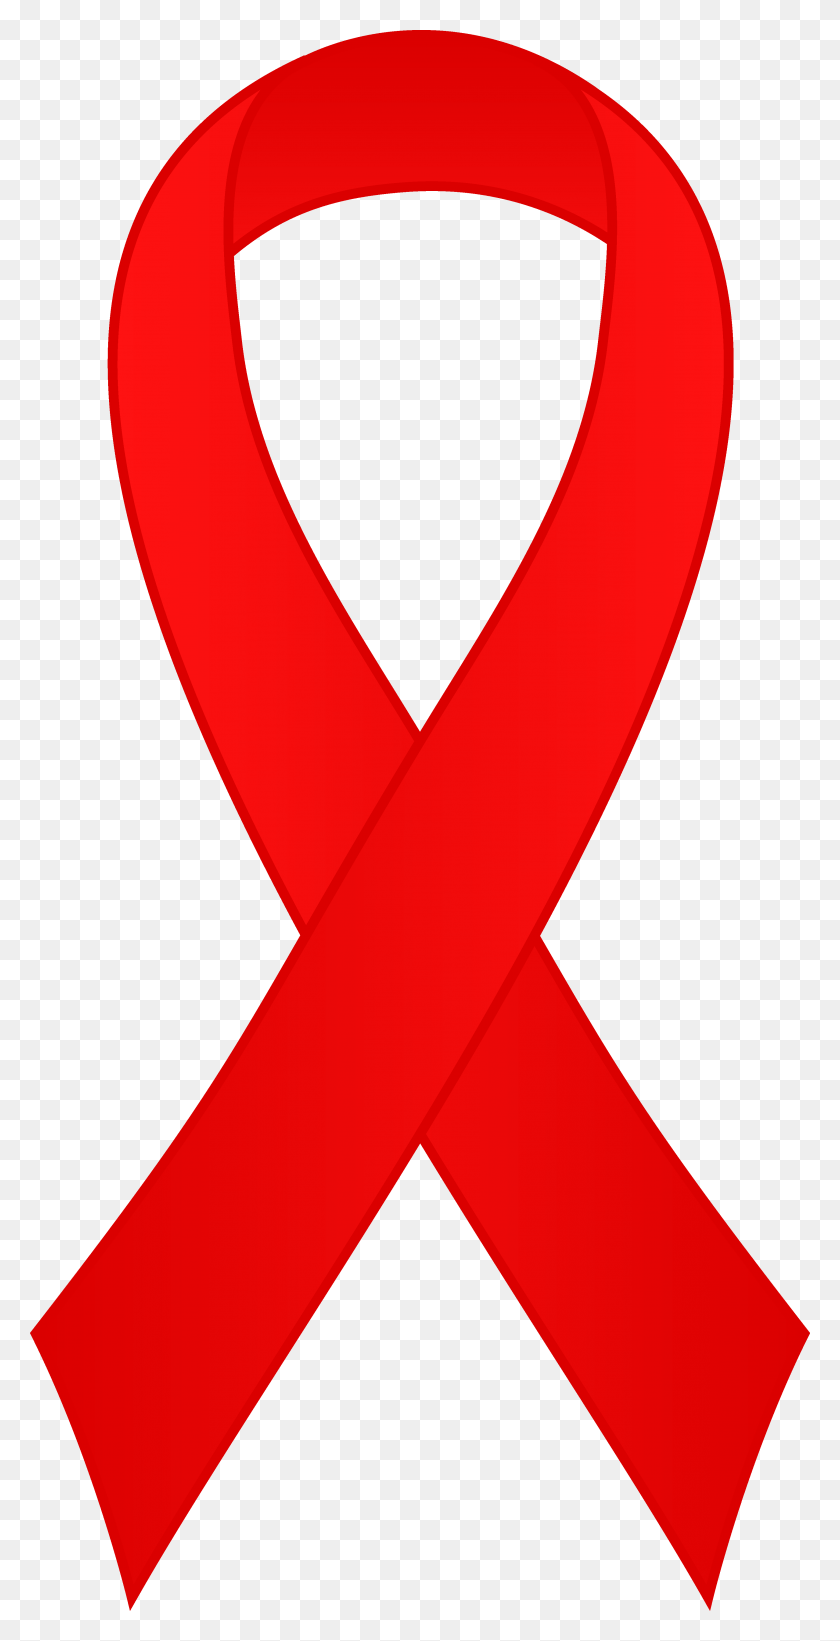 3337x6766 Red Ribbon G Clipart - G Clipart